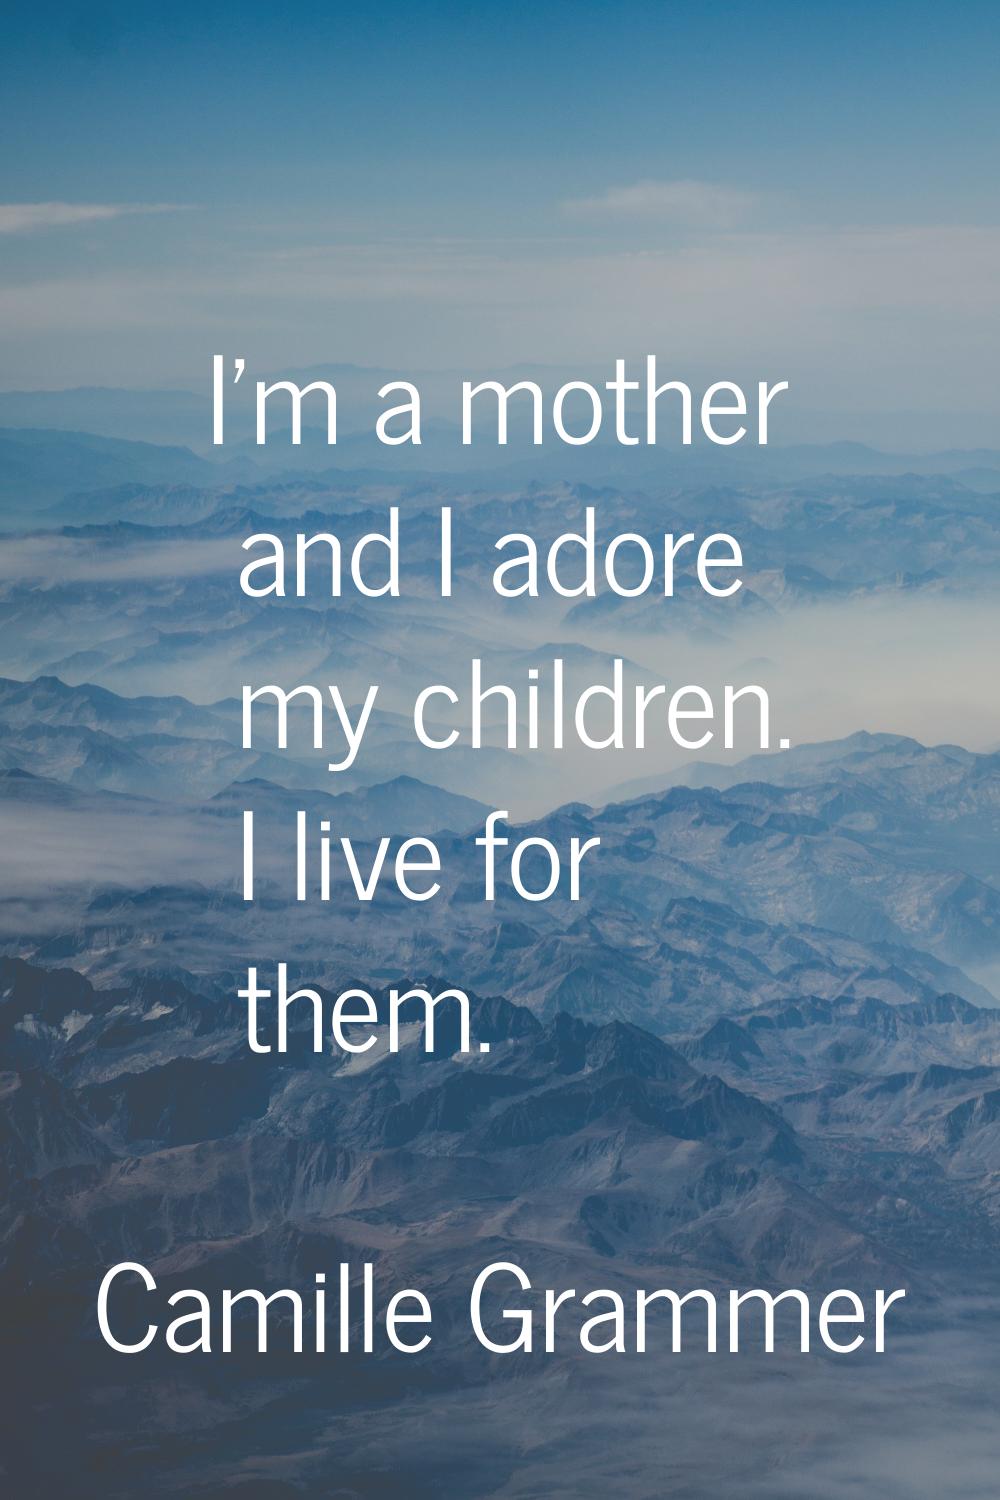 I'm a mother and I adore my children. I live for them.